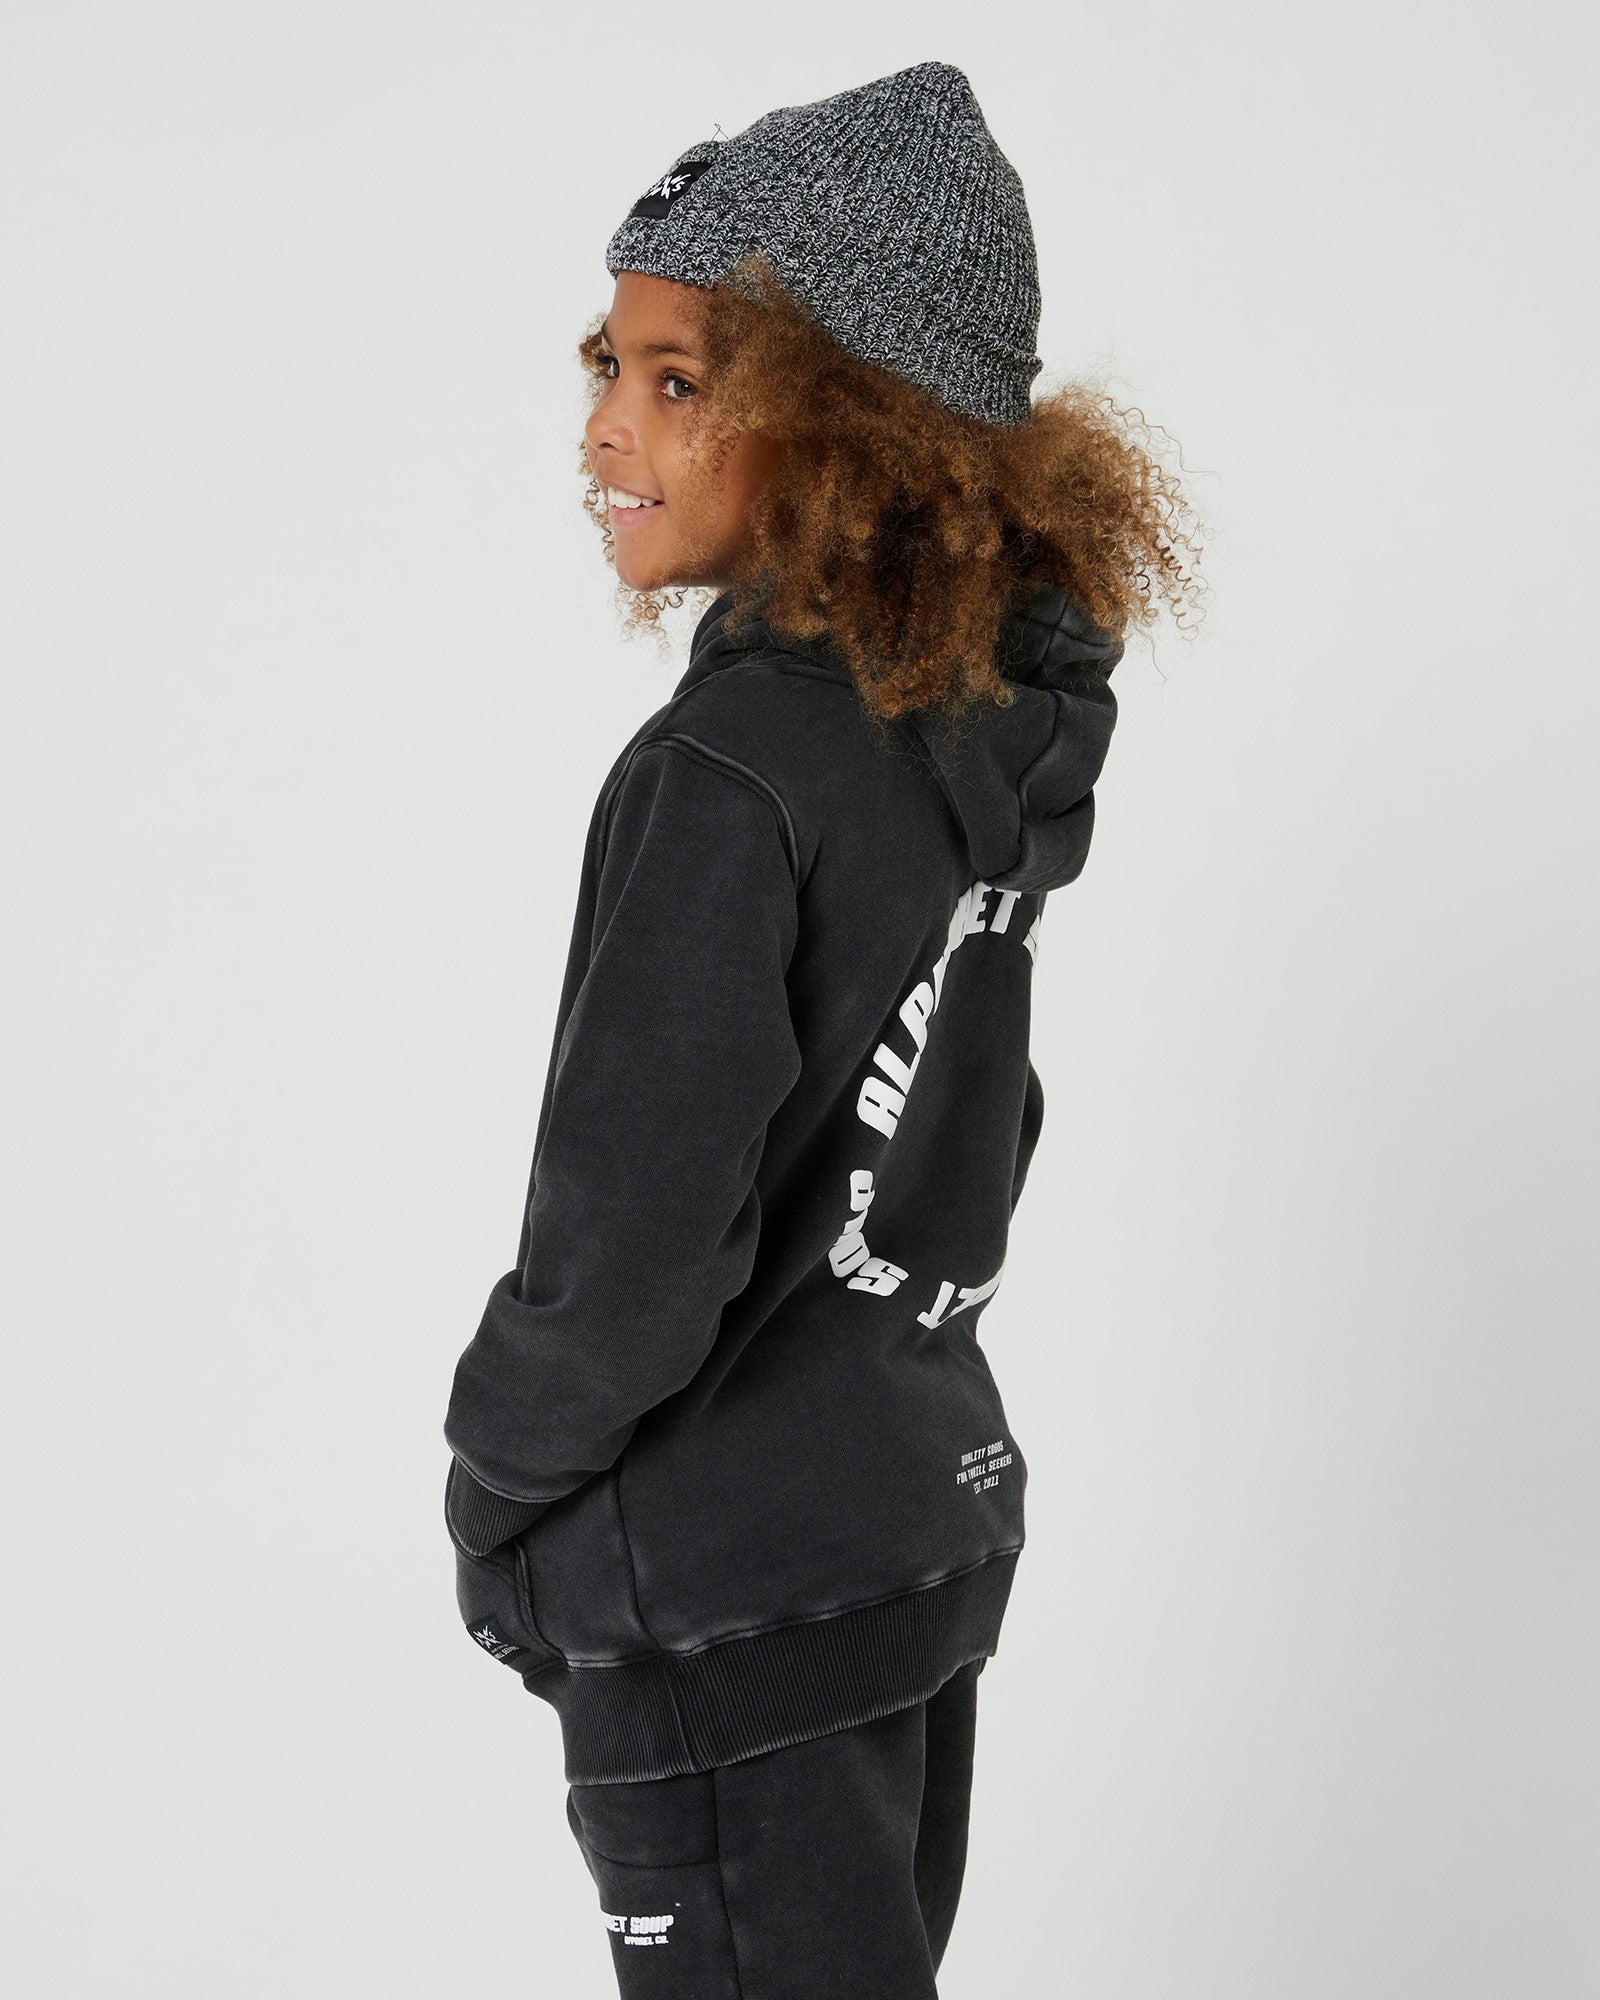 Boys Box Beanie by Alphabet Soup - comfortable rib knit with folded cuff and trendy grey marle colorway. Features woven logo patch and fits most sizes, perfect for outdoor activities.